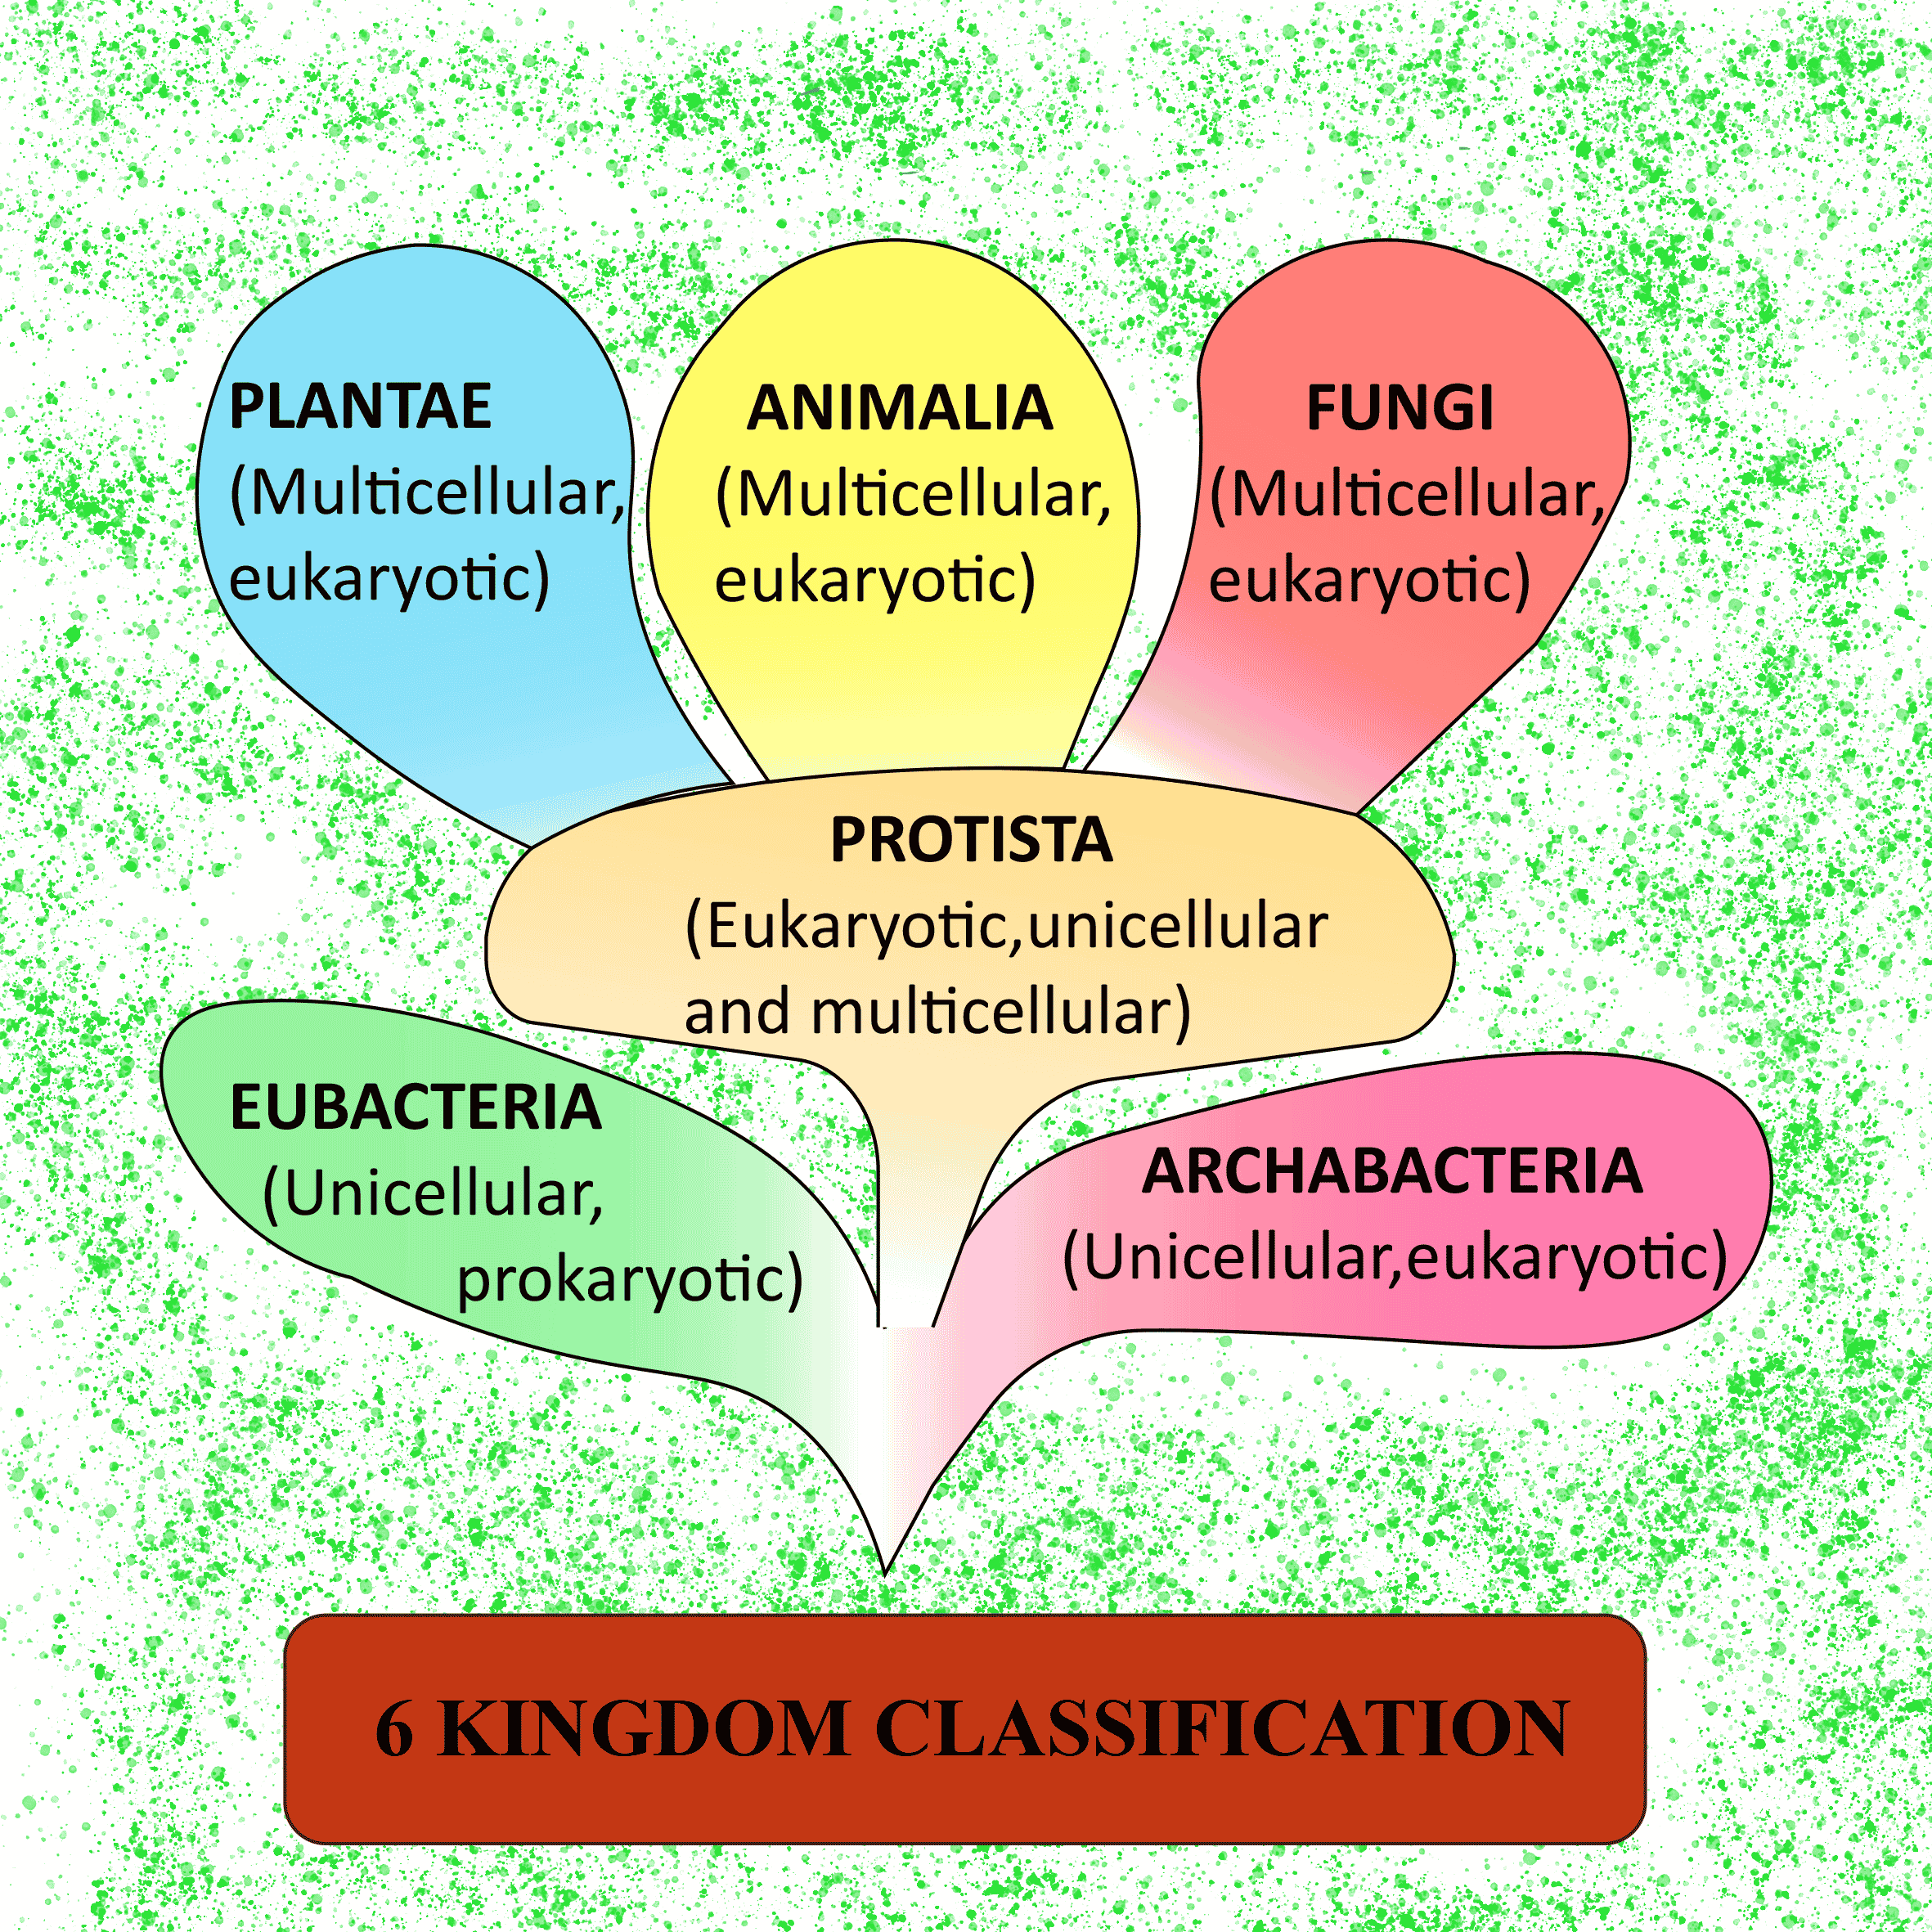 Six kingdom classification was suggested by class 11 biology CBSE